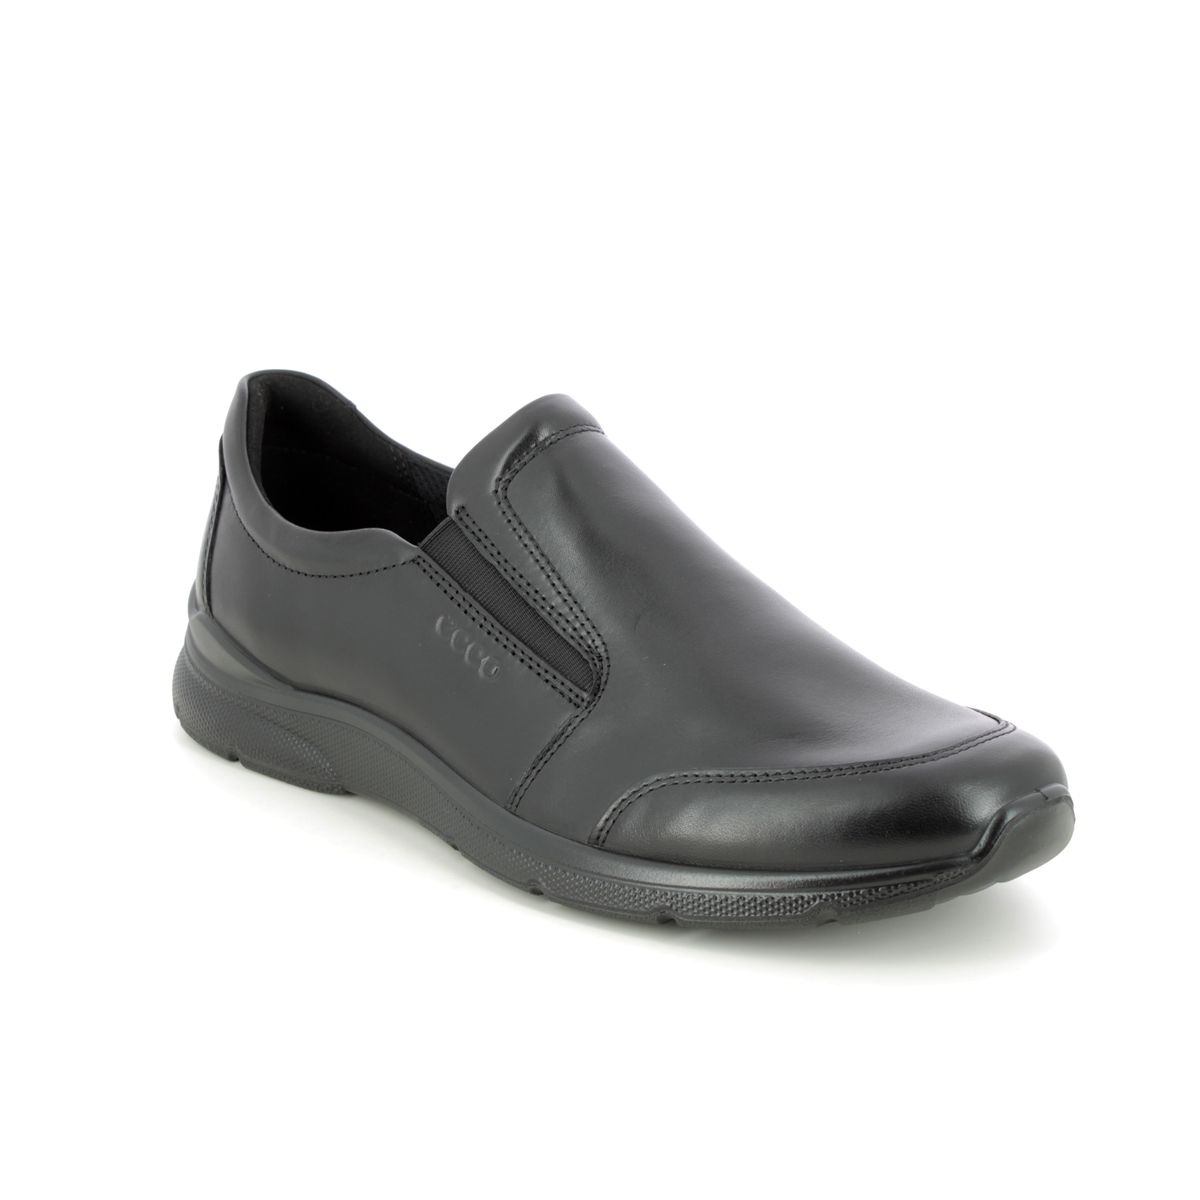 Ecco Irving Slip-On Black Leather Mens Slip-On Shoes 511684-11001 In Size 46 In Plain Black Leather